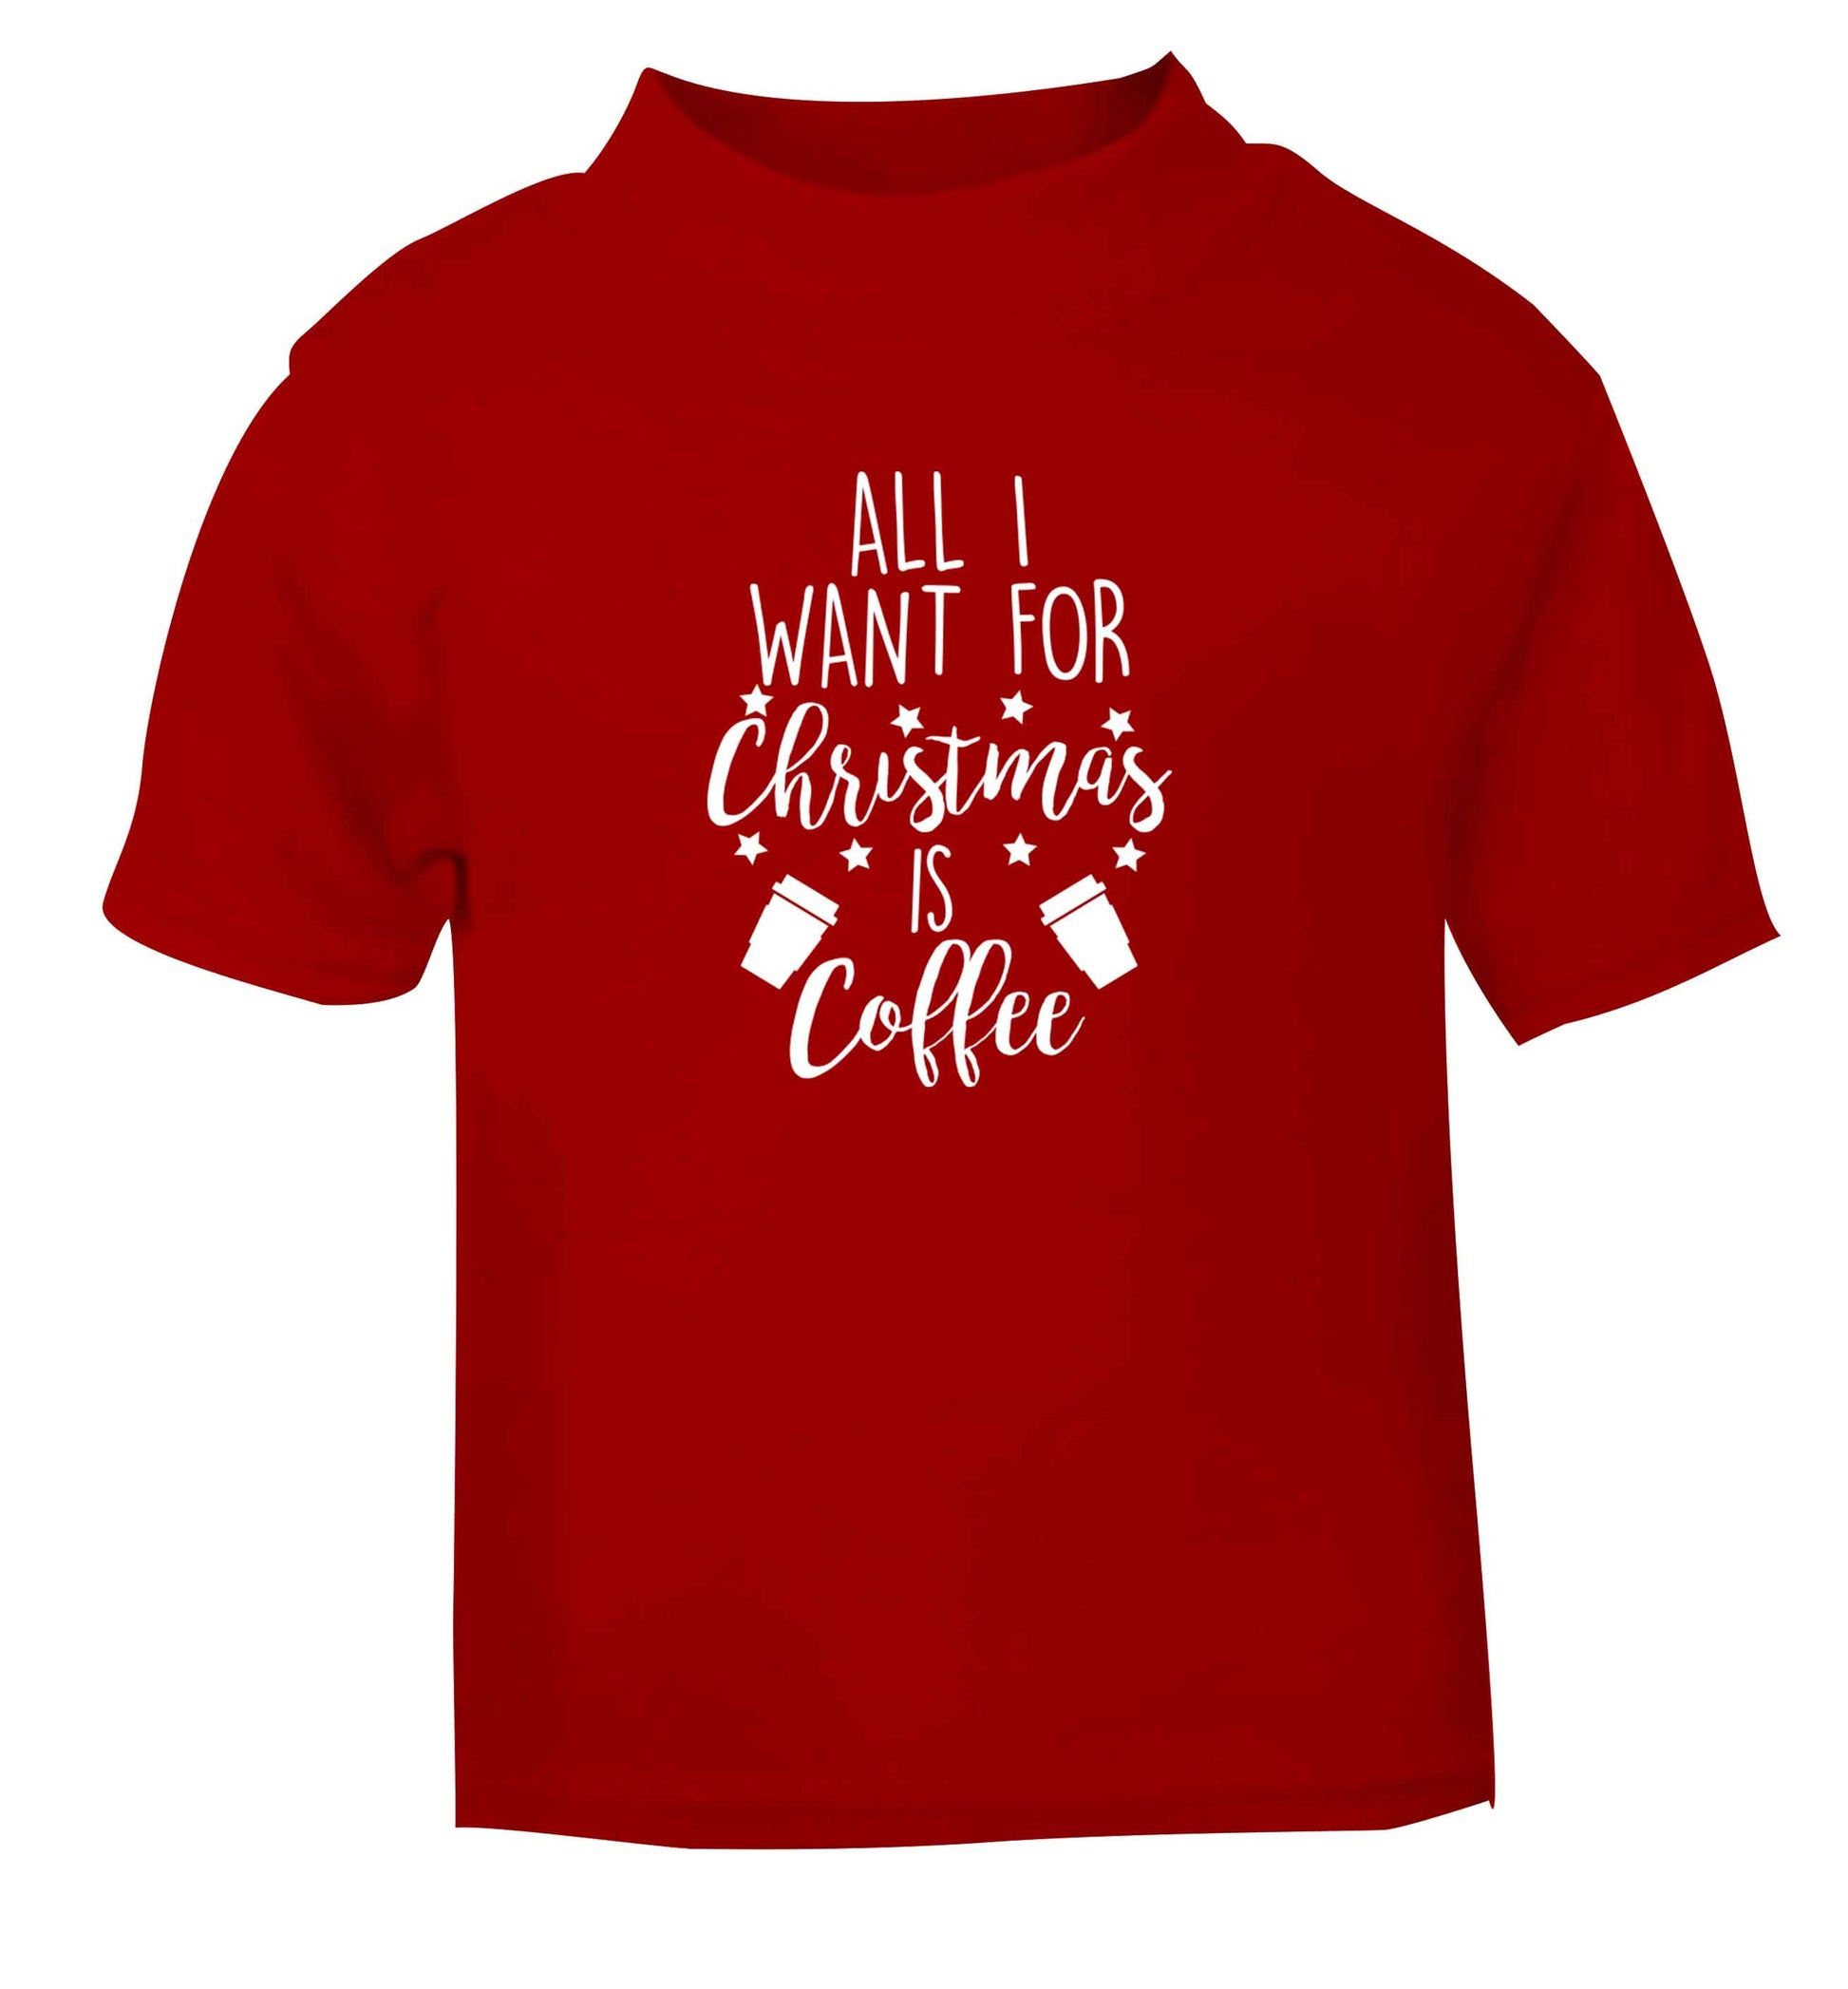 All I want for Christmas is coffee red Baby Toddler Tshirt 2 Years